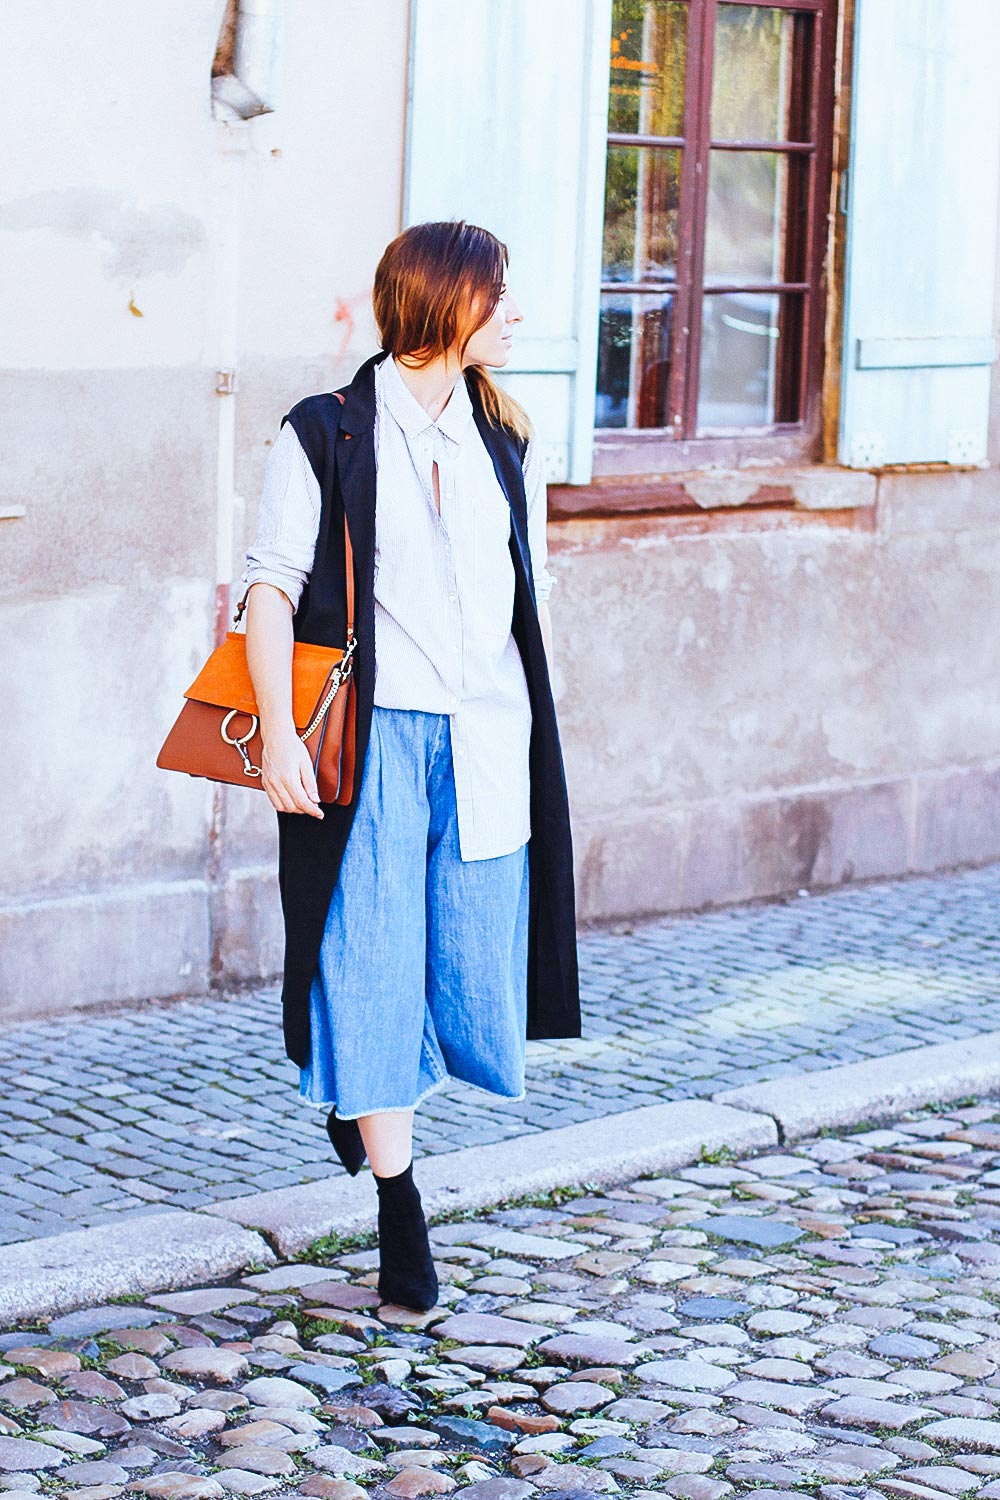 How to style Culottes, My Looks and Styling Tricks, Shopping Tips, Fashion Blog, whoismocca.com